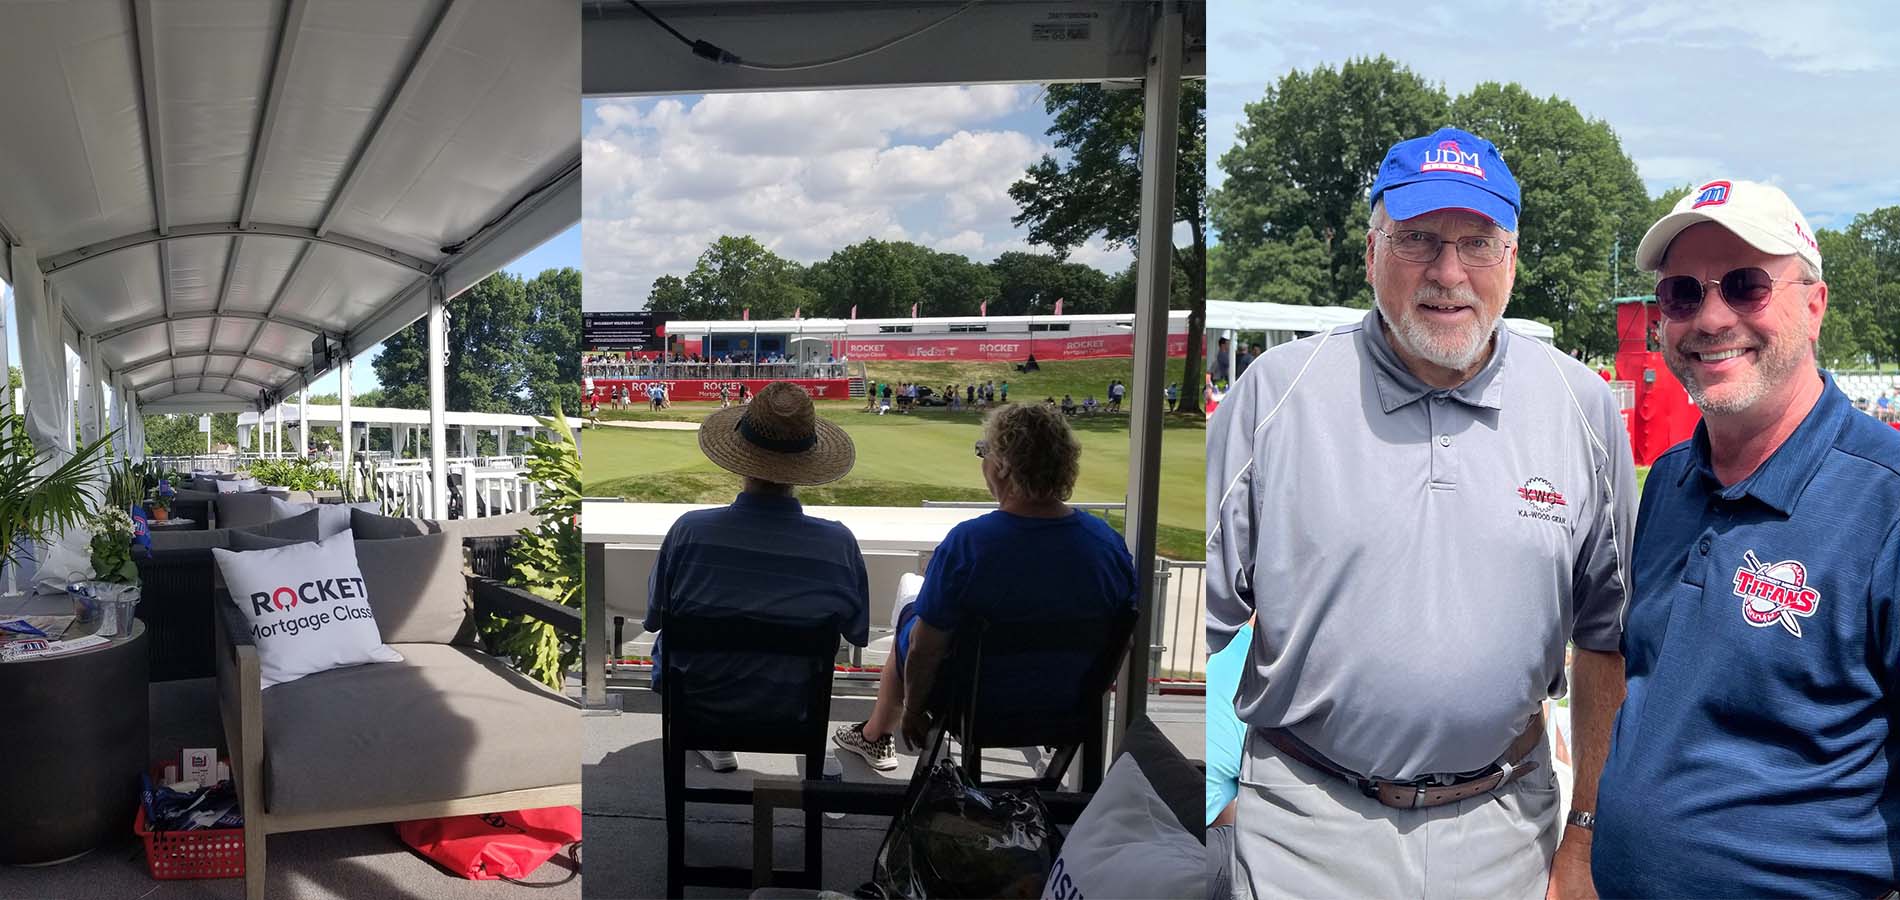 Photos of spectators in a suite during the Rocket Mortgage Classic at the Detroit Golf Club.